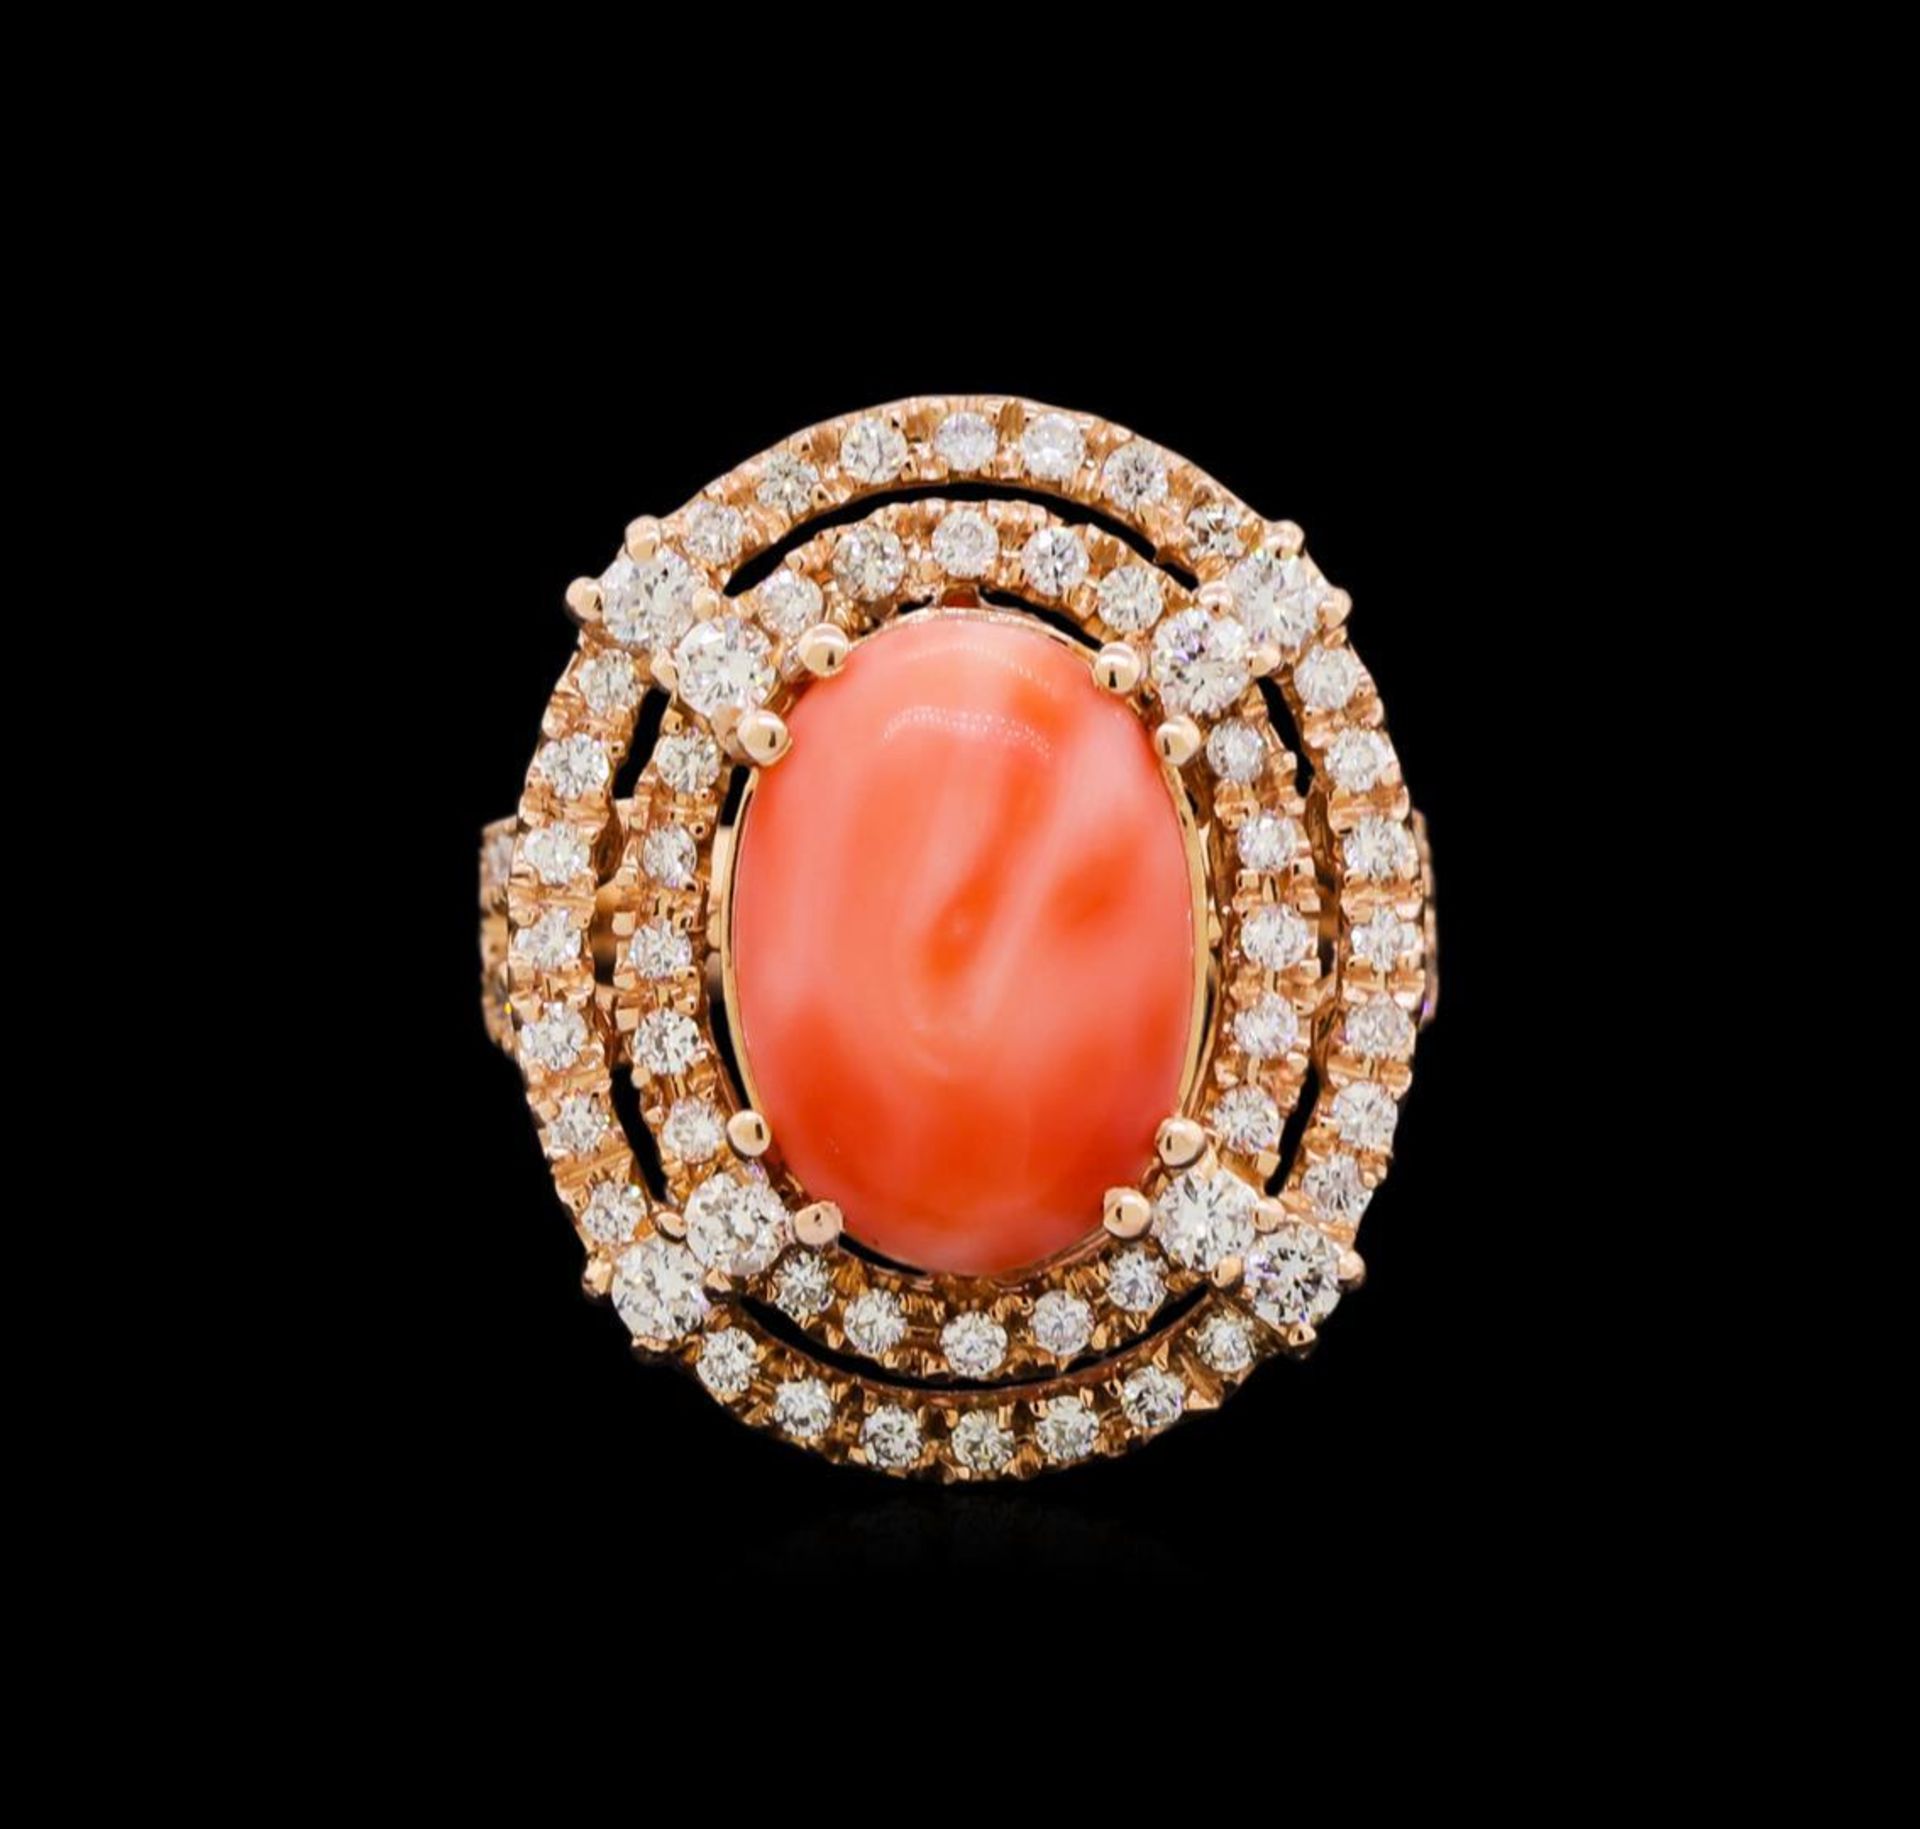 5.89 ctw Pink Coral and Diamond Ring - 14KT Rose Gold - Image 2 of 6